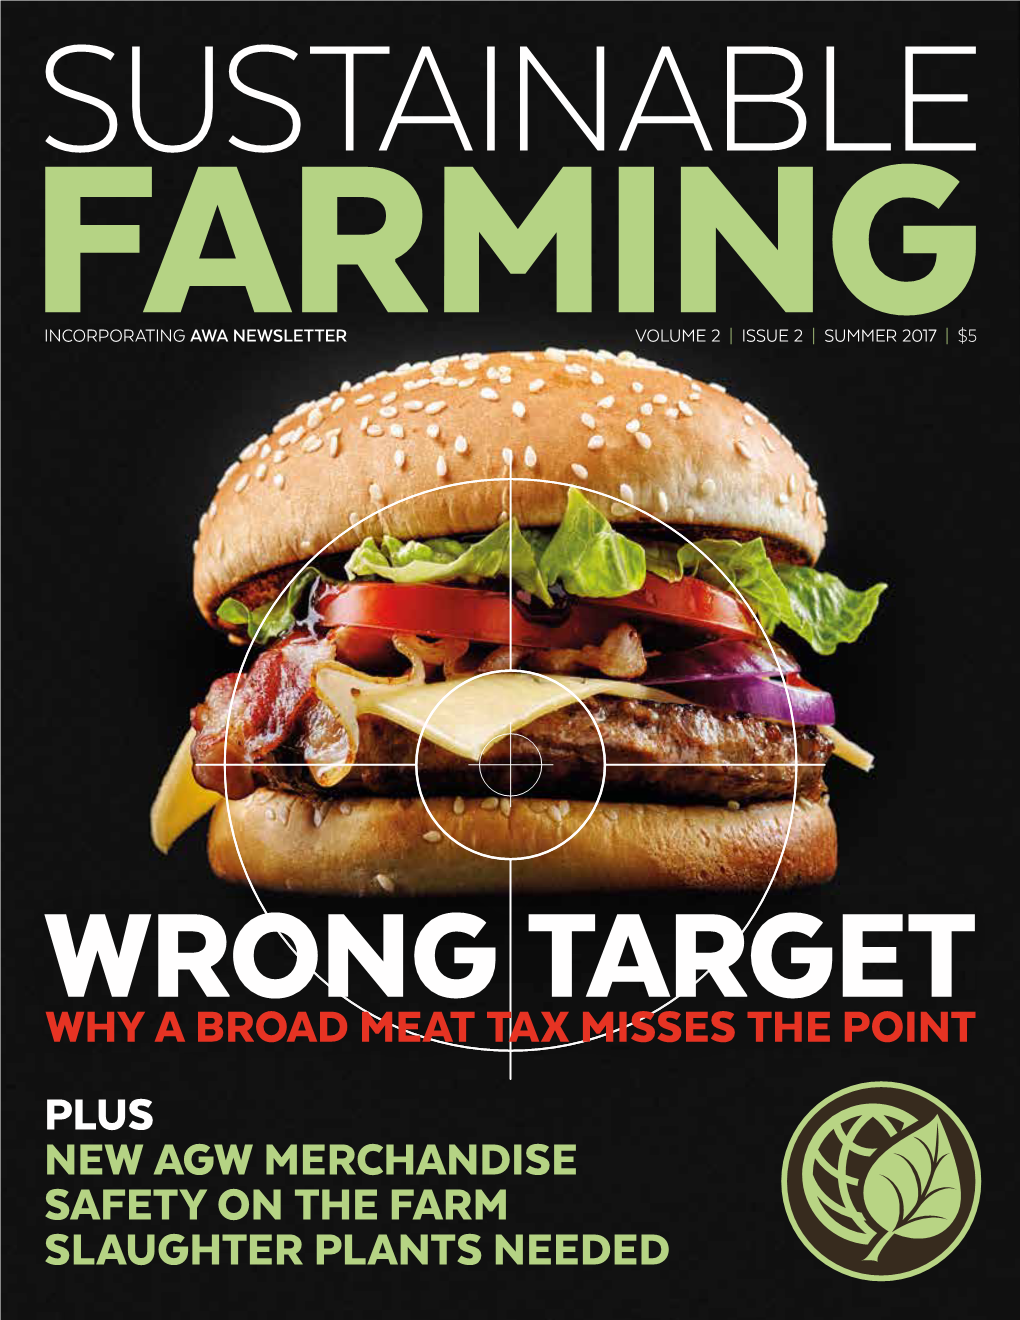 Why a Broad Meat Tax Misses the Point PLUS NEW Agw Merchandise Safety on the Farm Slaughter Plants Needed the Echo Chamber Dietary Risks